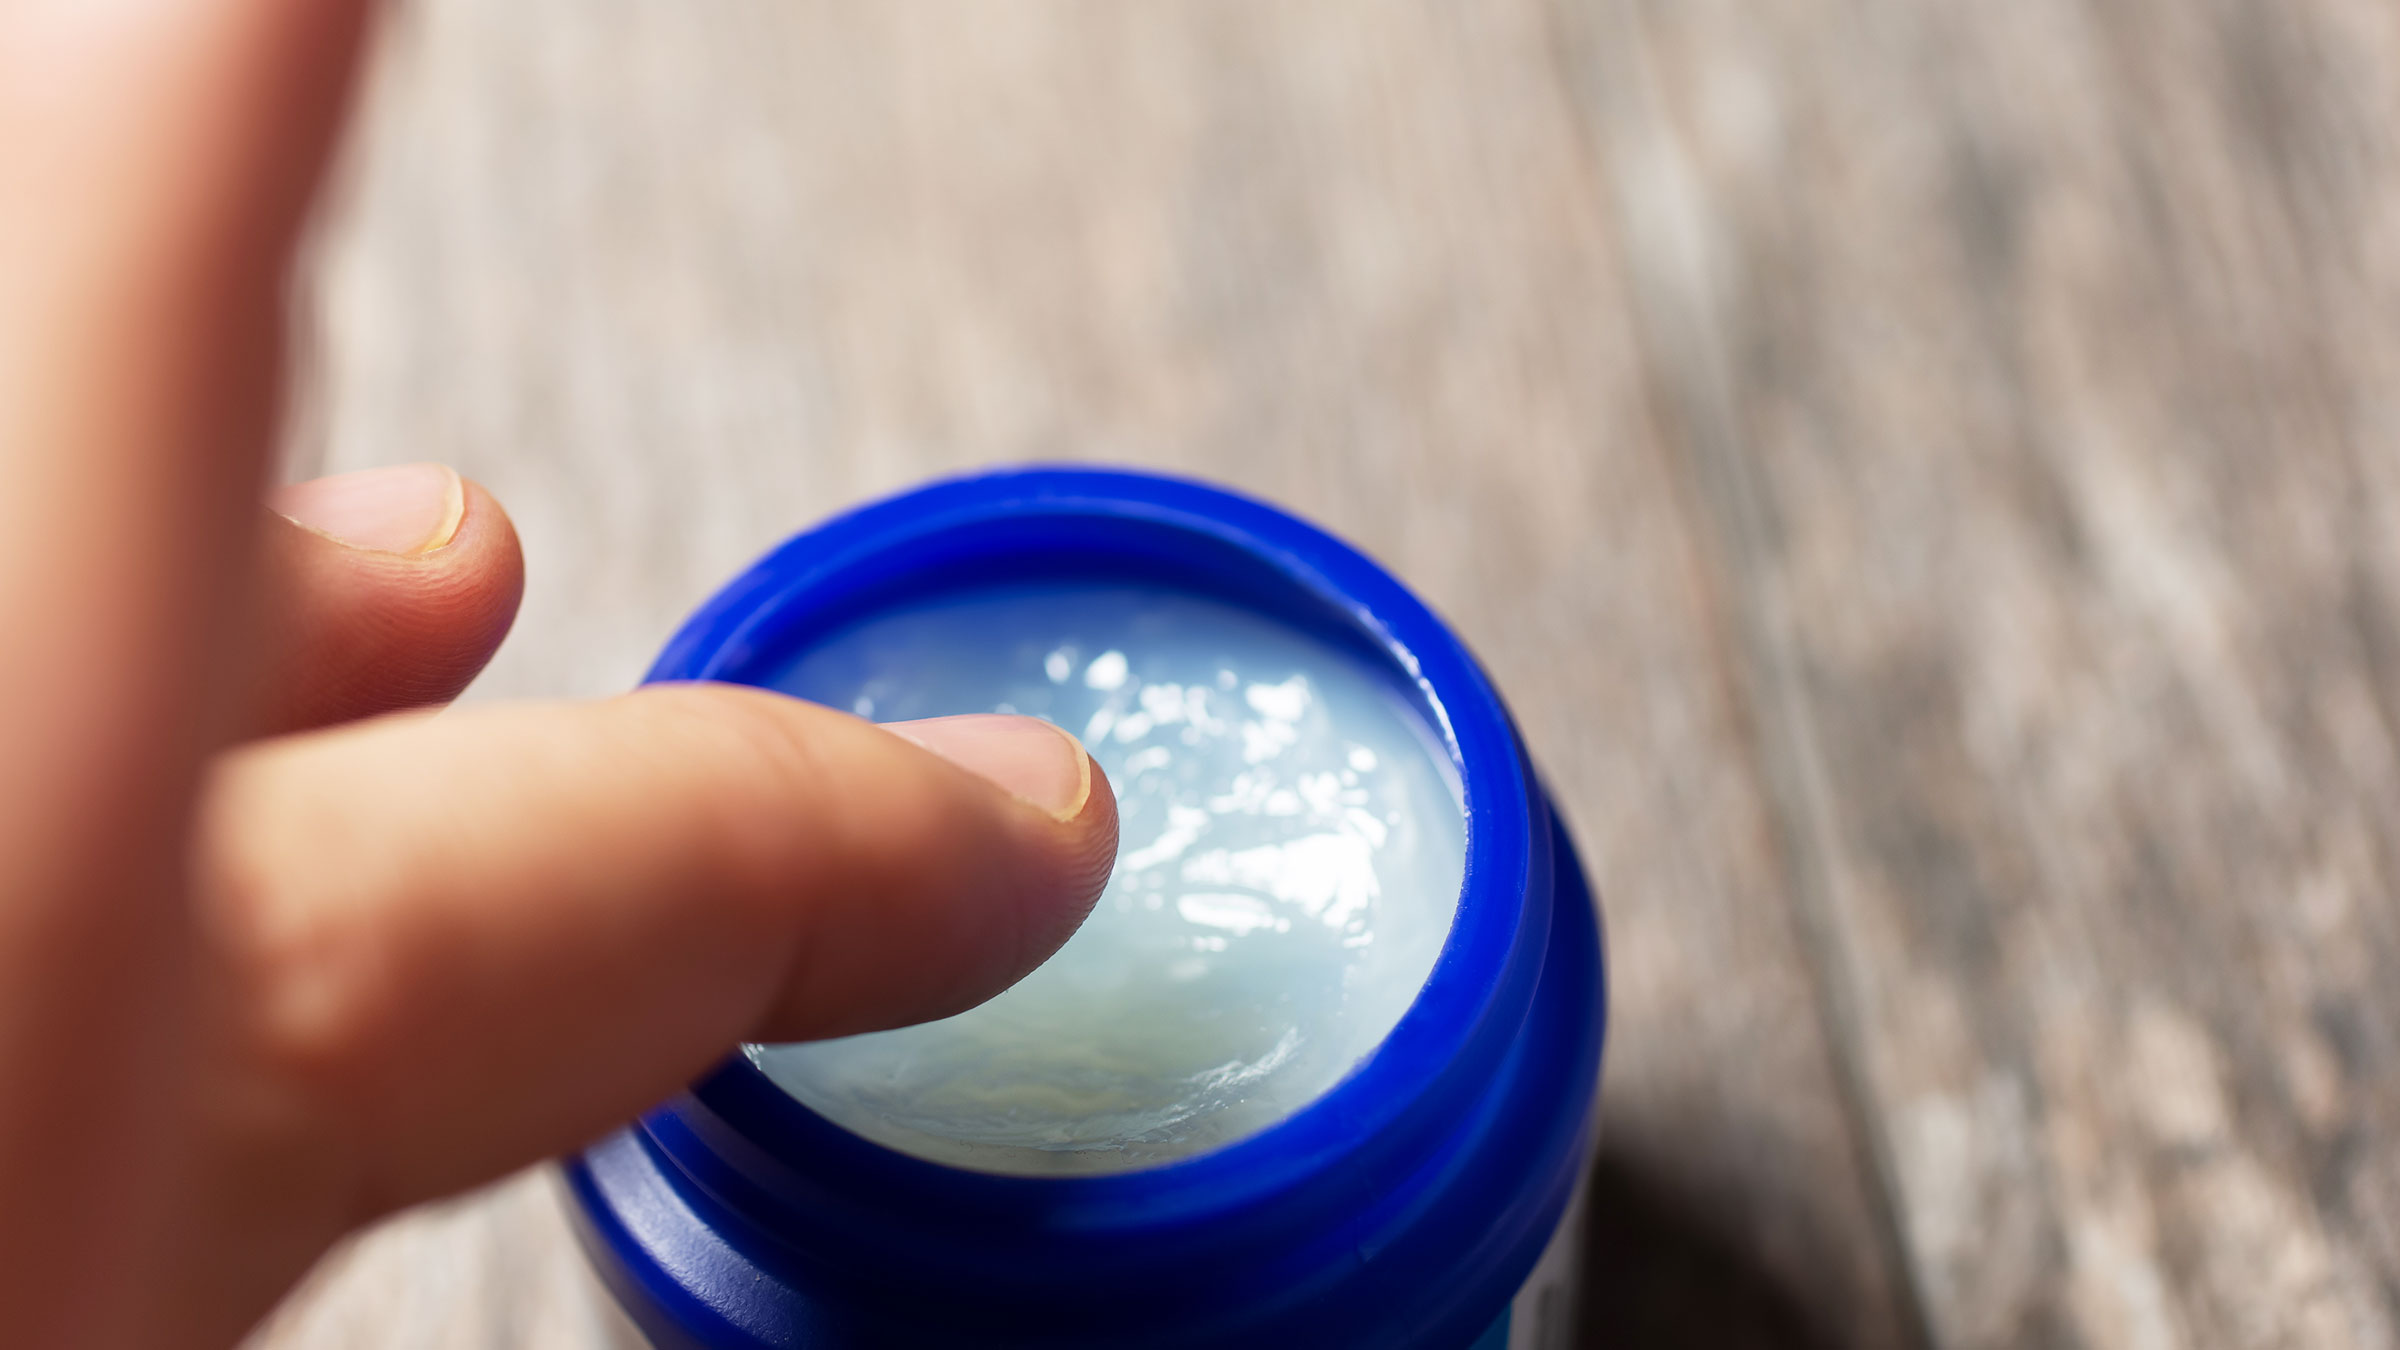 Does Putting Vicks VapoRub on Feet Relieve Colds? - GoodRx